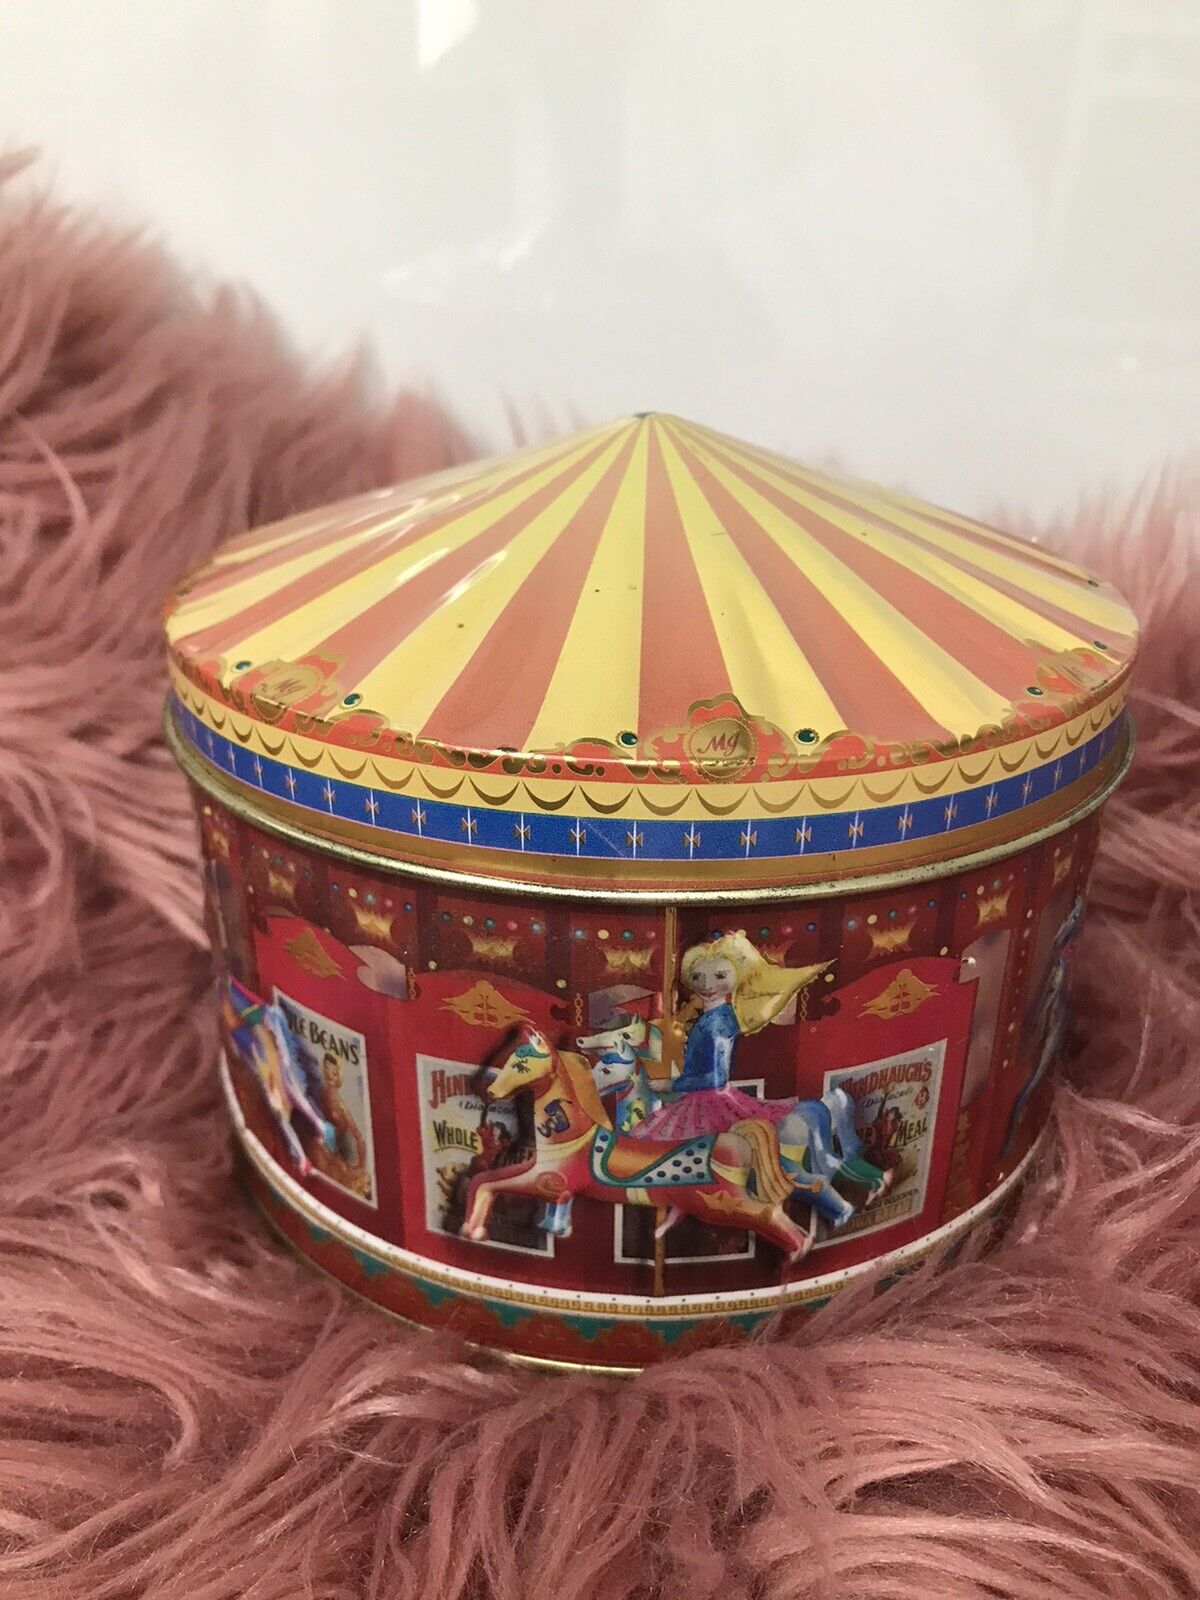 The Merry Go Round Carousel EMPTY Tin Storage Container Collectable Display